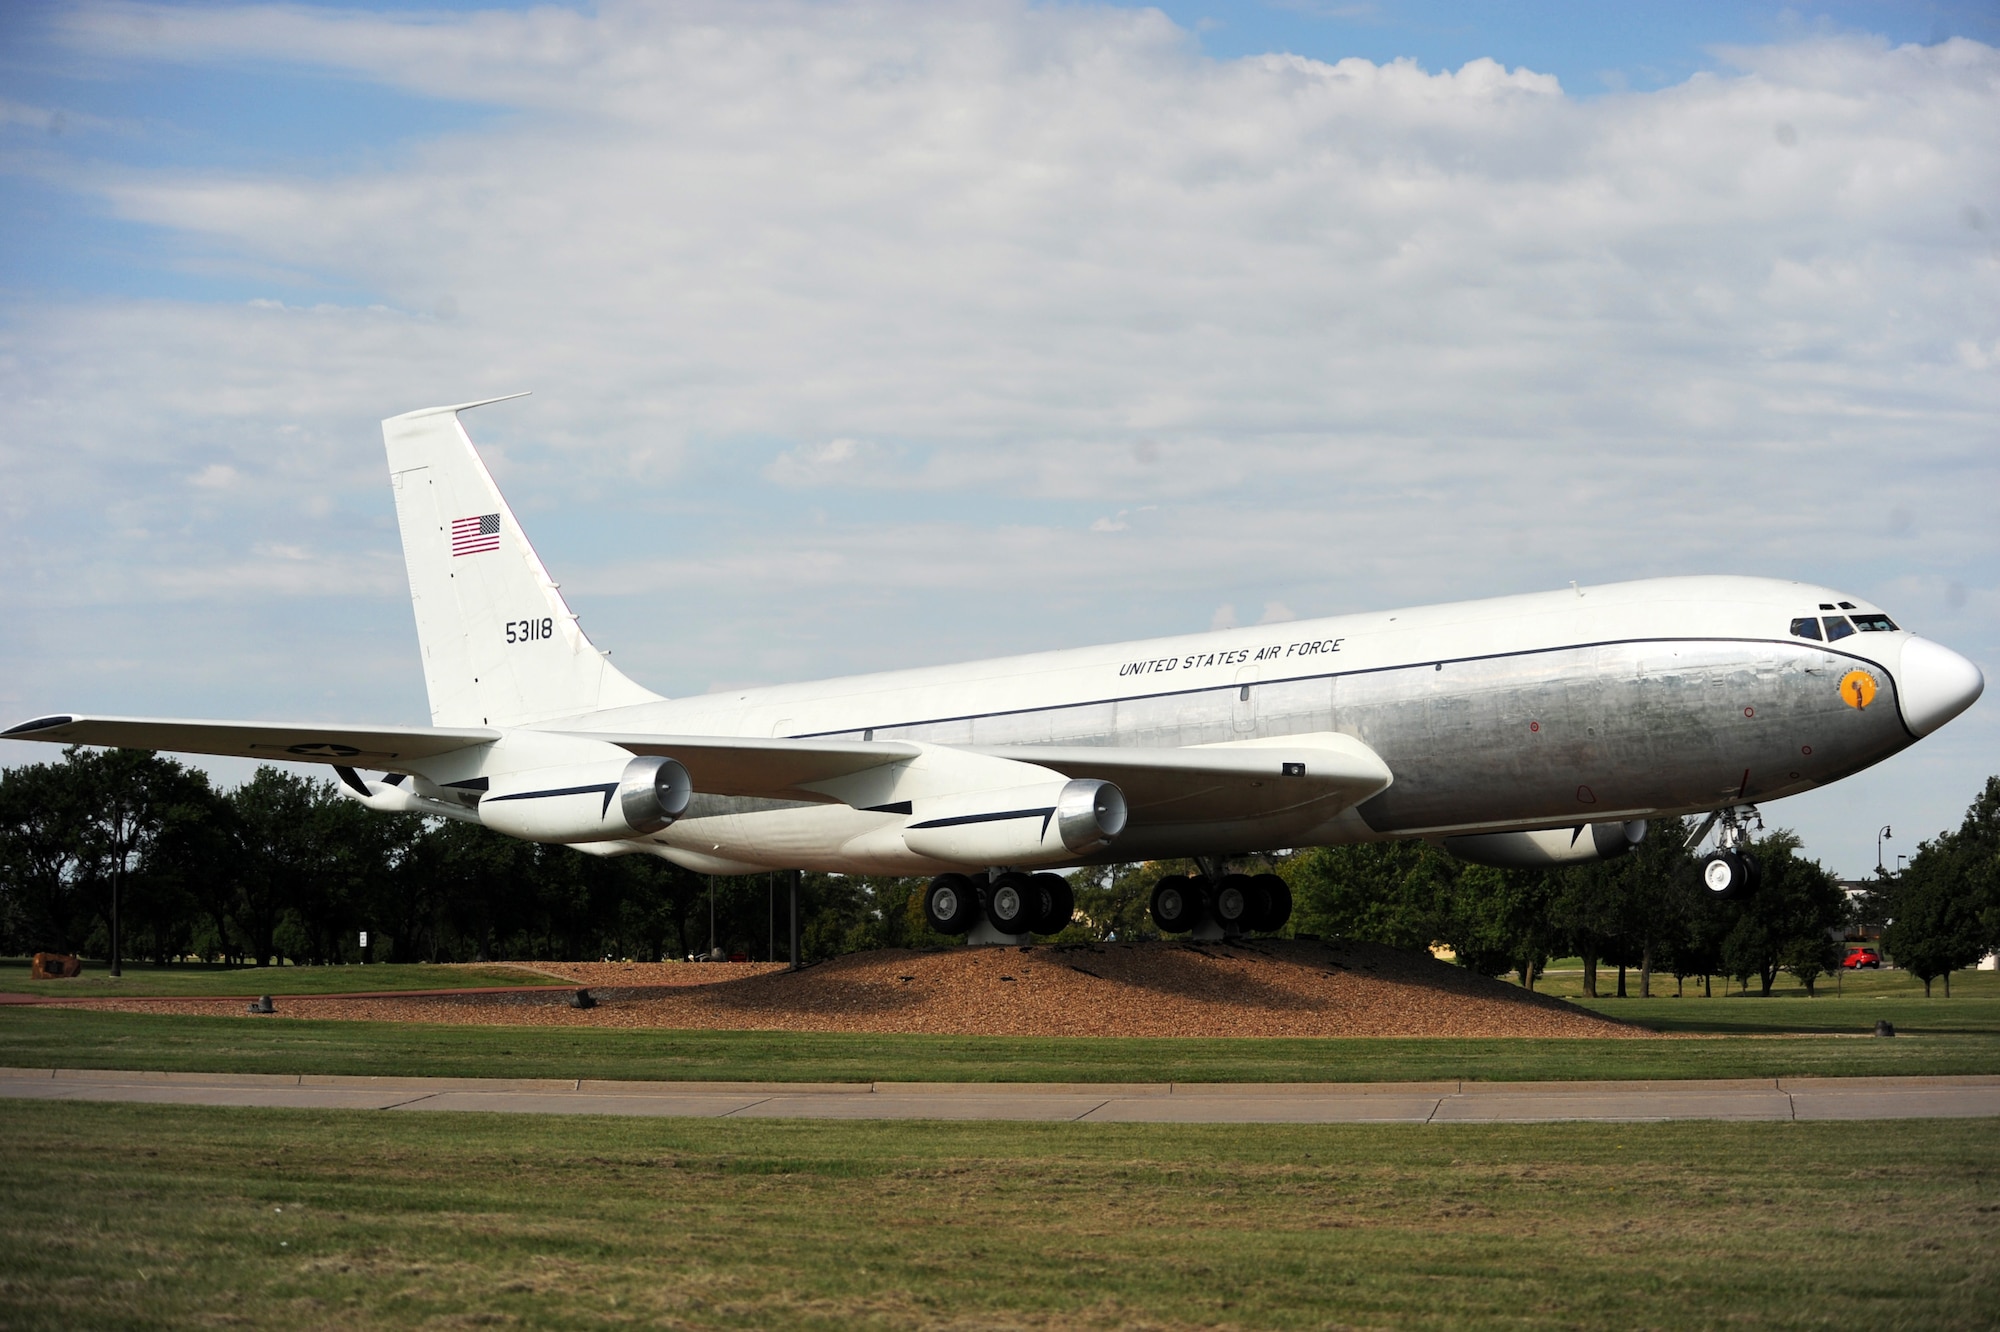 Aircraft 55-3118 sits on display, Aug. 13, 2015, near the east gate of McConnell Air Force Base, Kan. The aircraft completed its first flight on Aug. 31, 1956 and was the first of 732 KC-135 Stratotankers delivered to the Air Force. Nicknamed “City of Renton” after the Washington city where it was manufactured, the Stratotanker was retired after decades of service in the Air Force and more than 40 years after its first flight. (U.S. Air Force photo by Airman Jenna Caldwell)